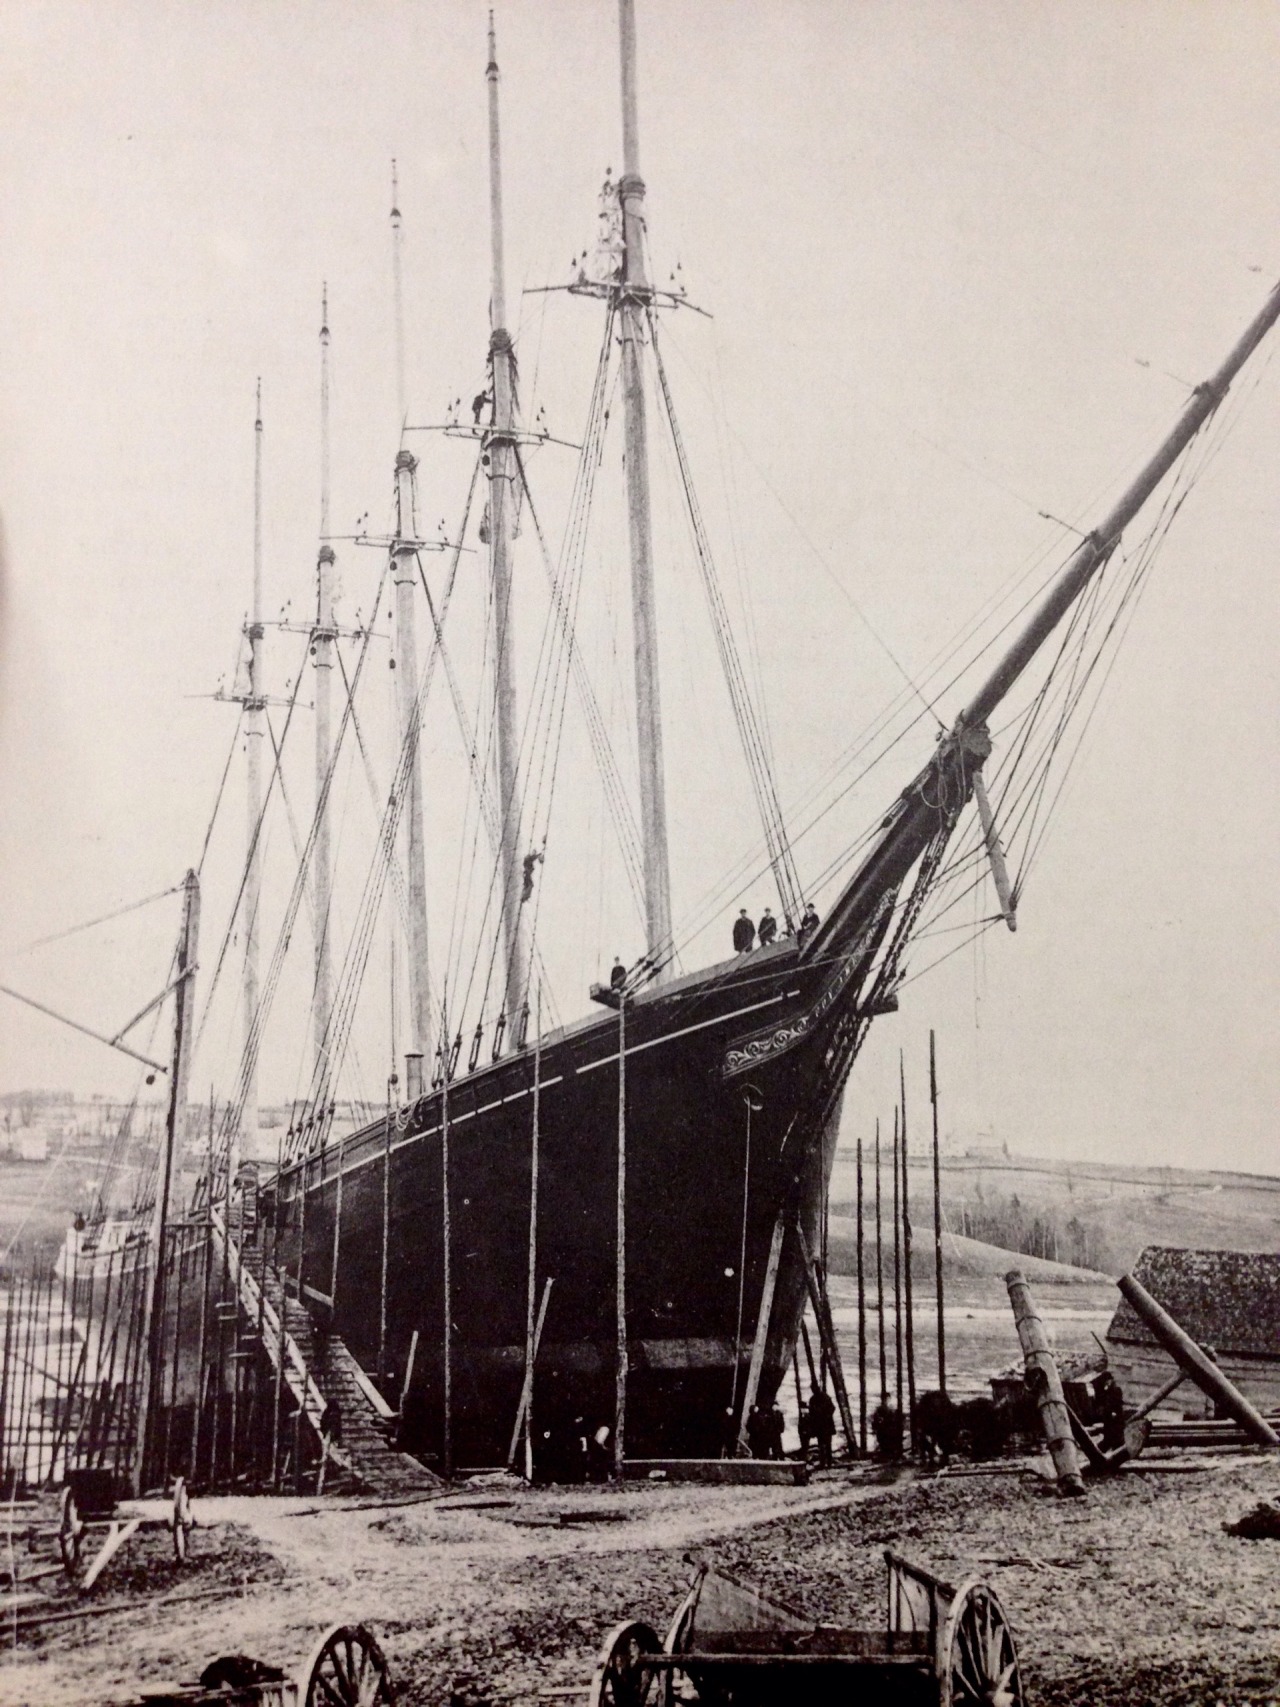 rickinmar:
“The Governor Ames was the first 5 masted schooner. built in 1888 at Waldoboro Maine.
”